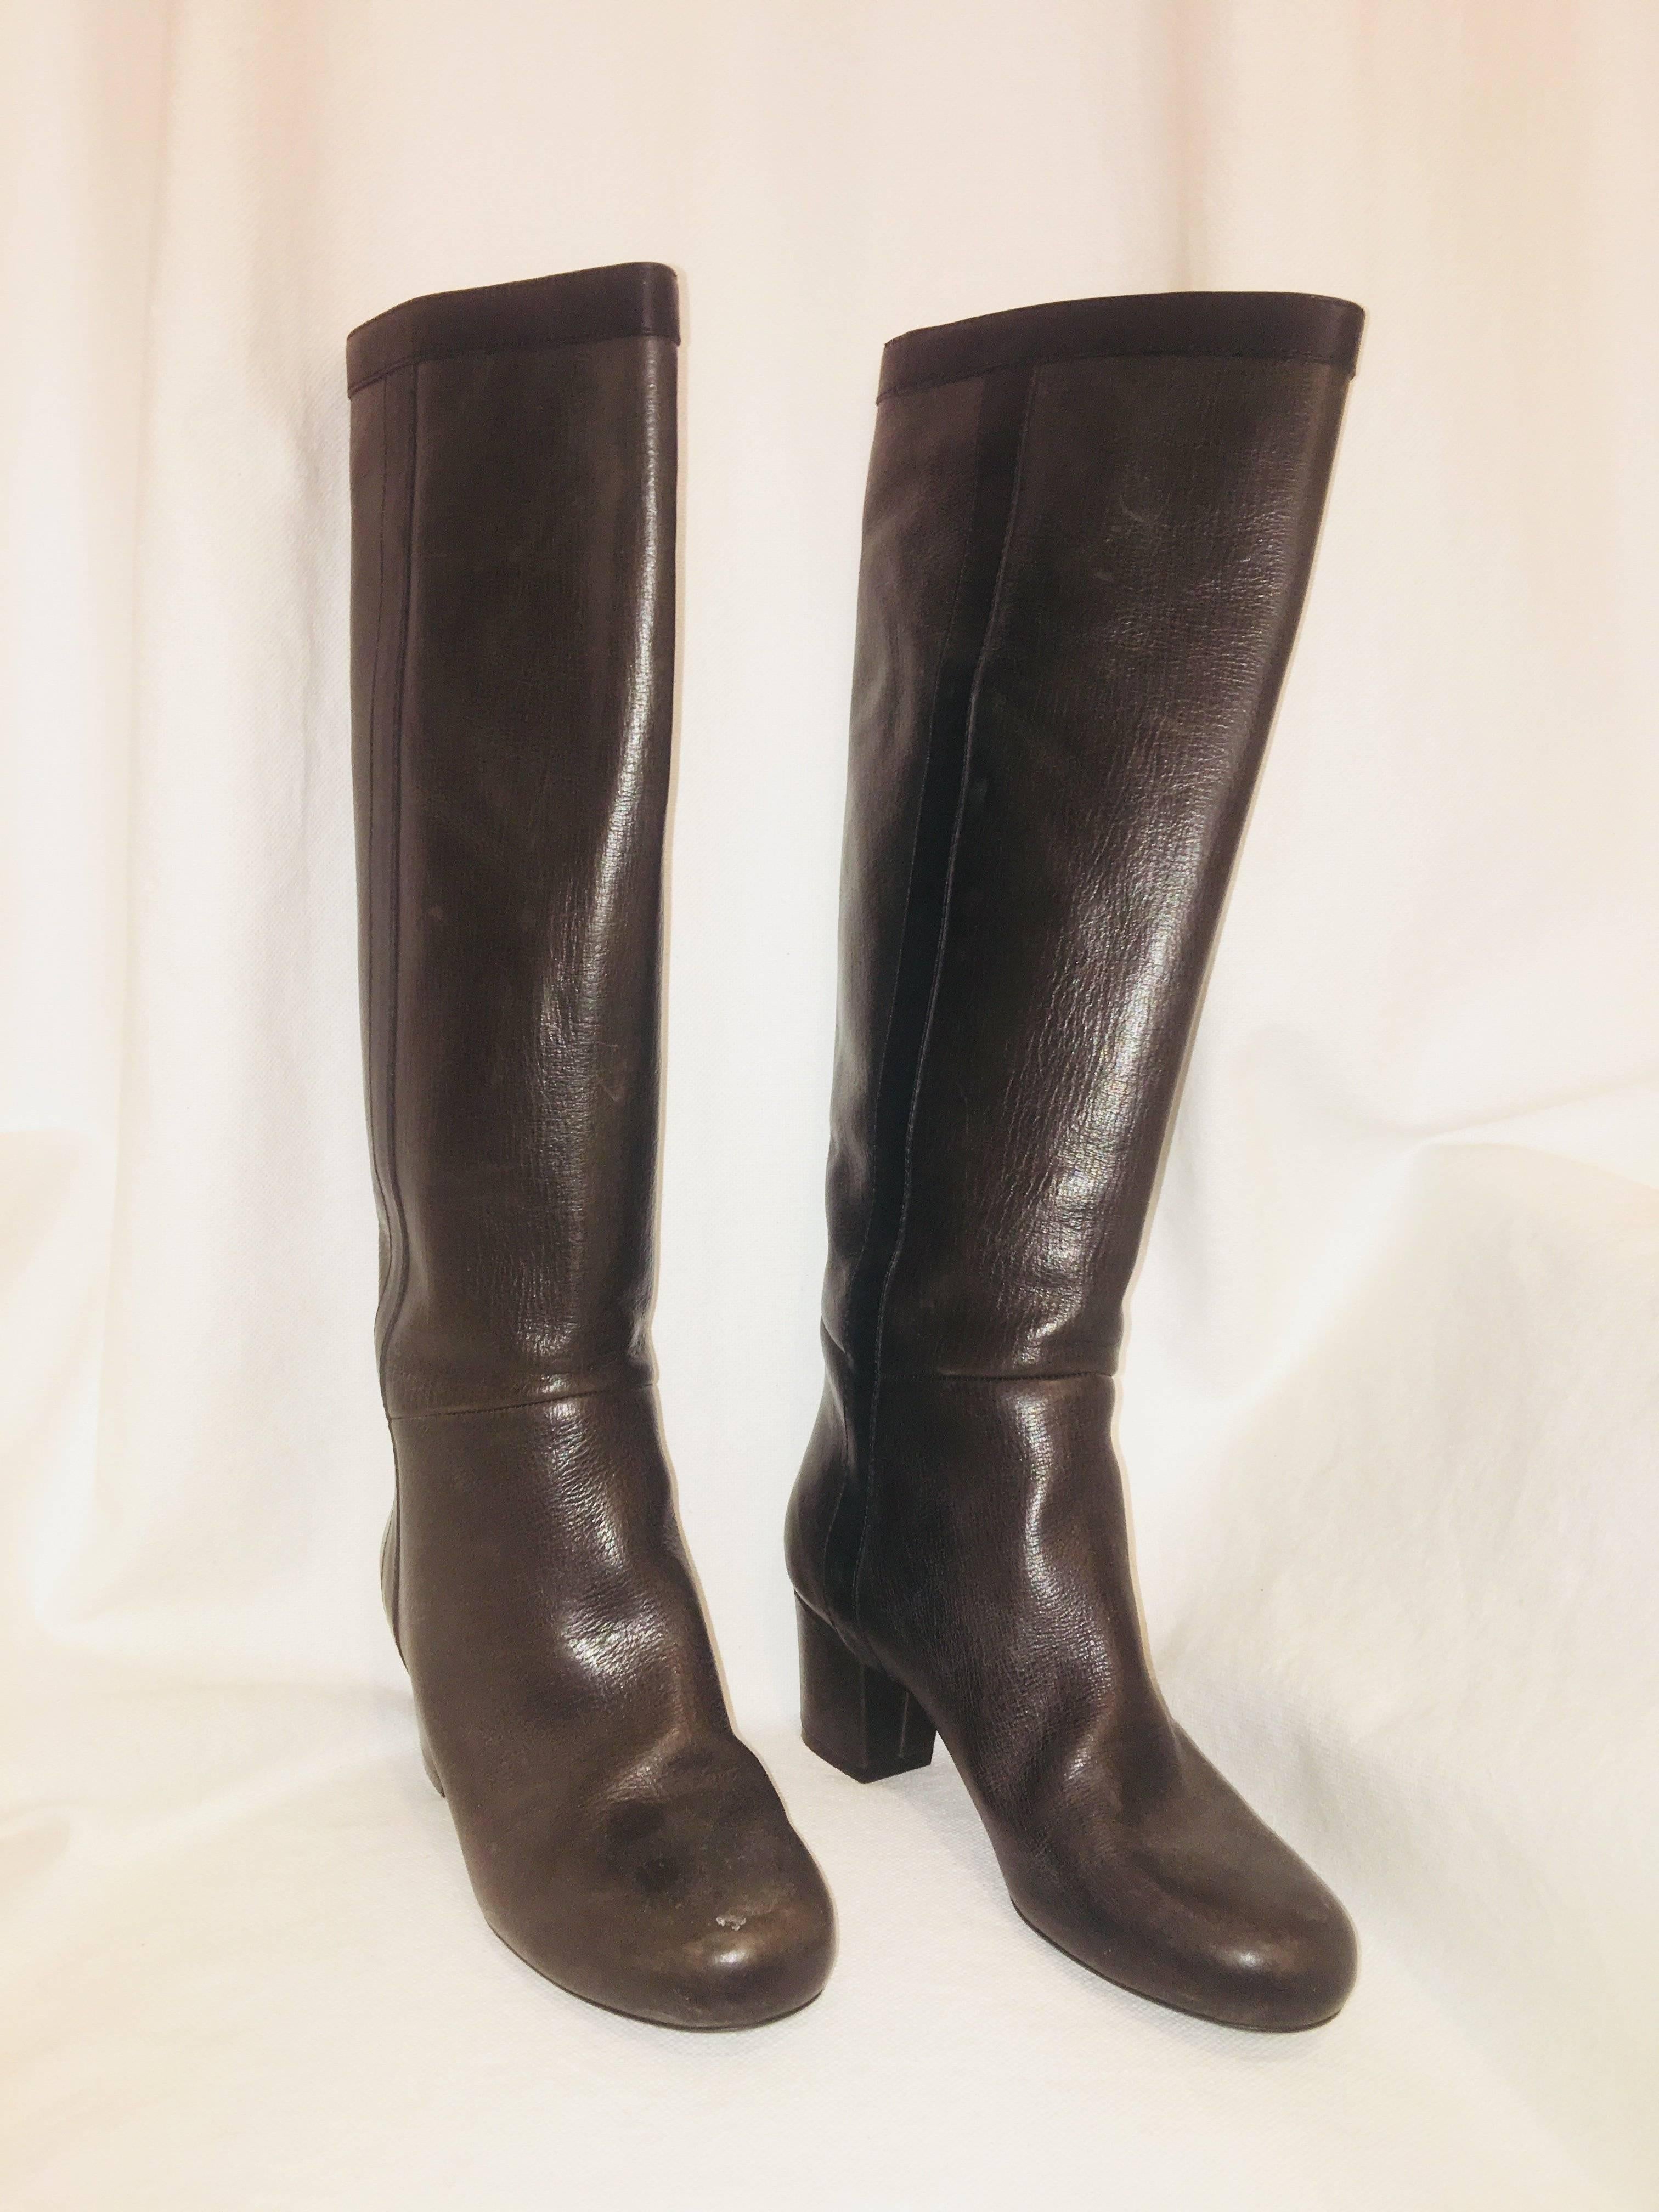 Lanvin Black Leather Tall Boots with Mid-Heel in Size 37.